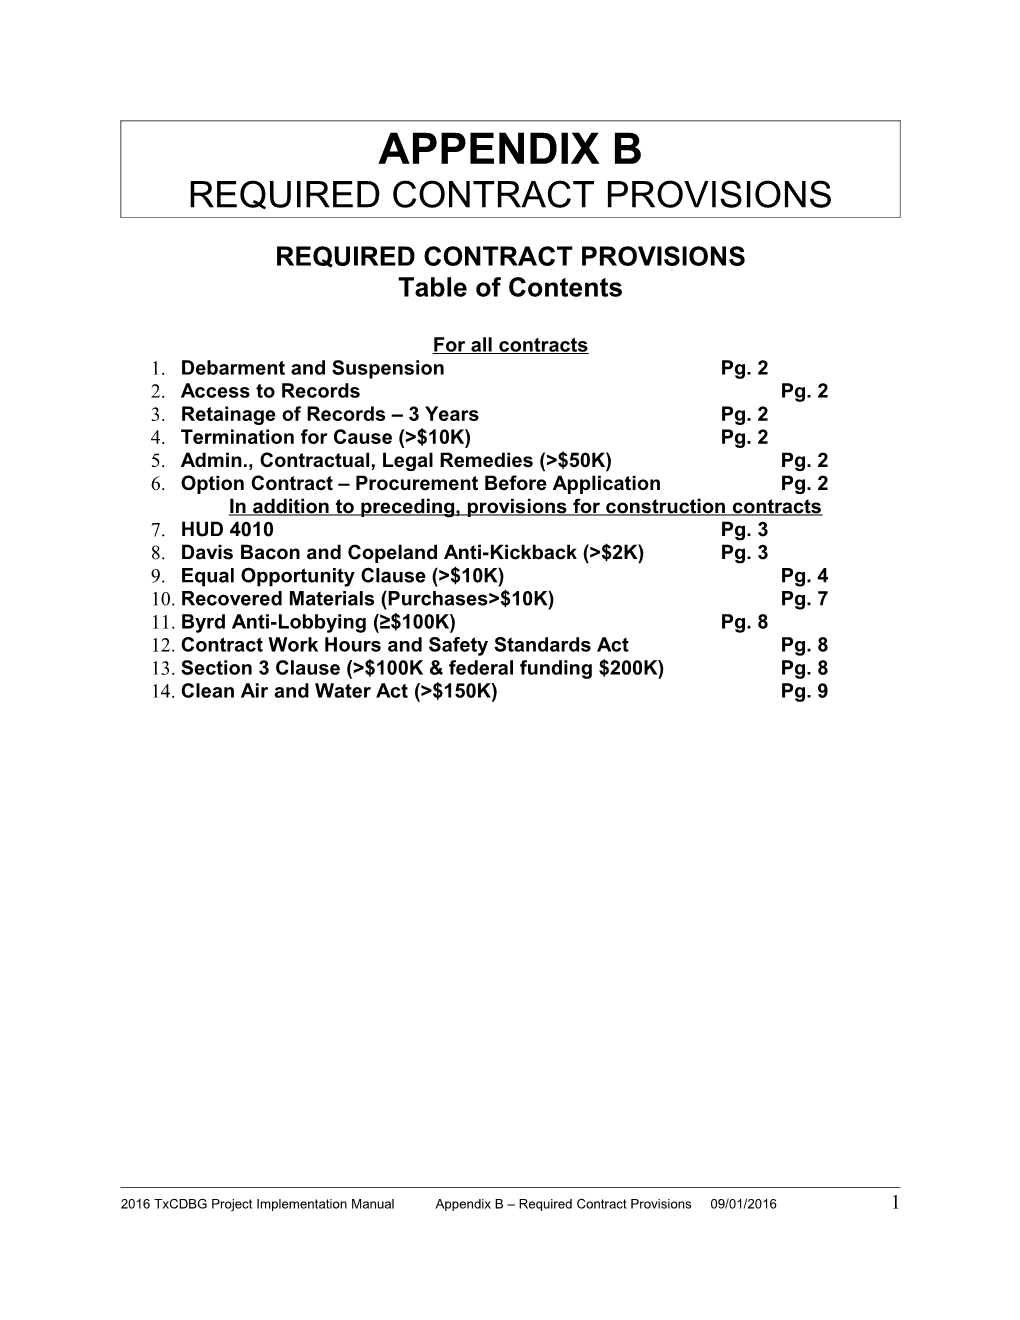 Required Contract Provisions